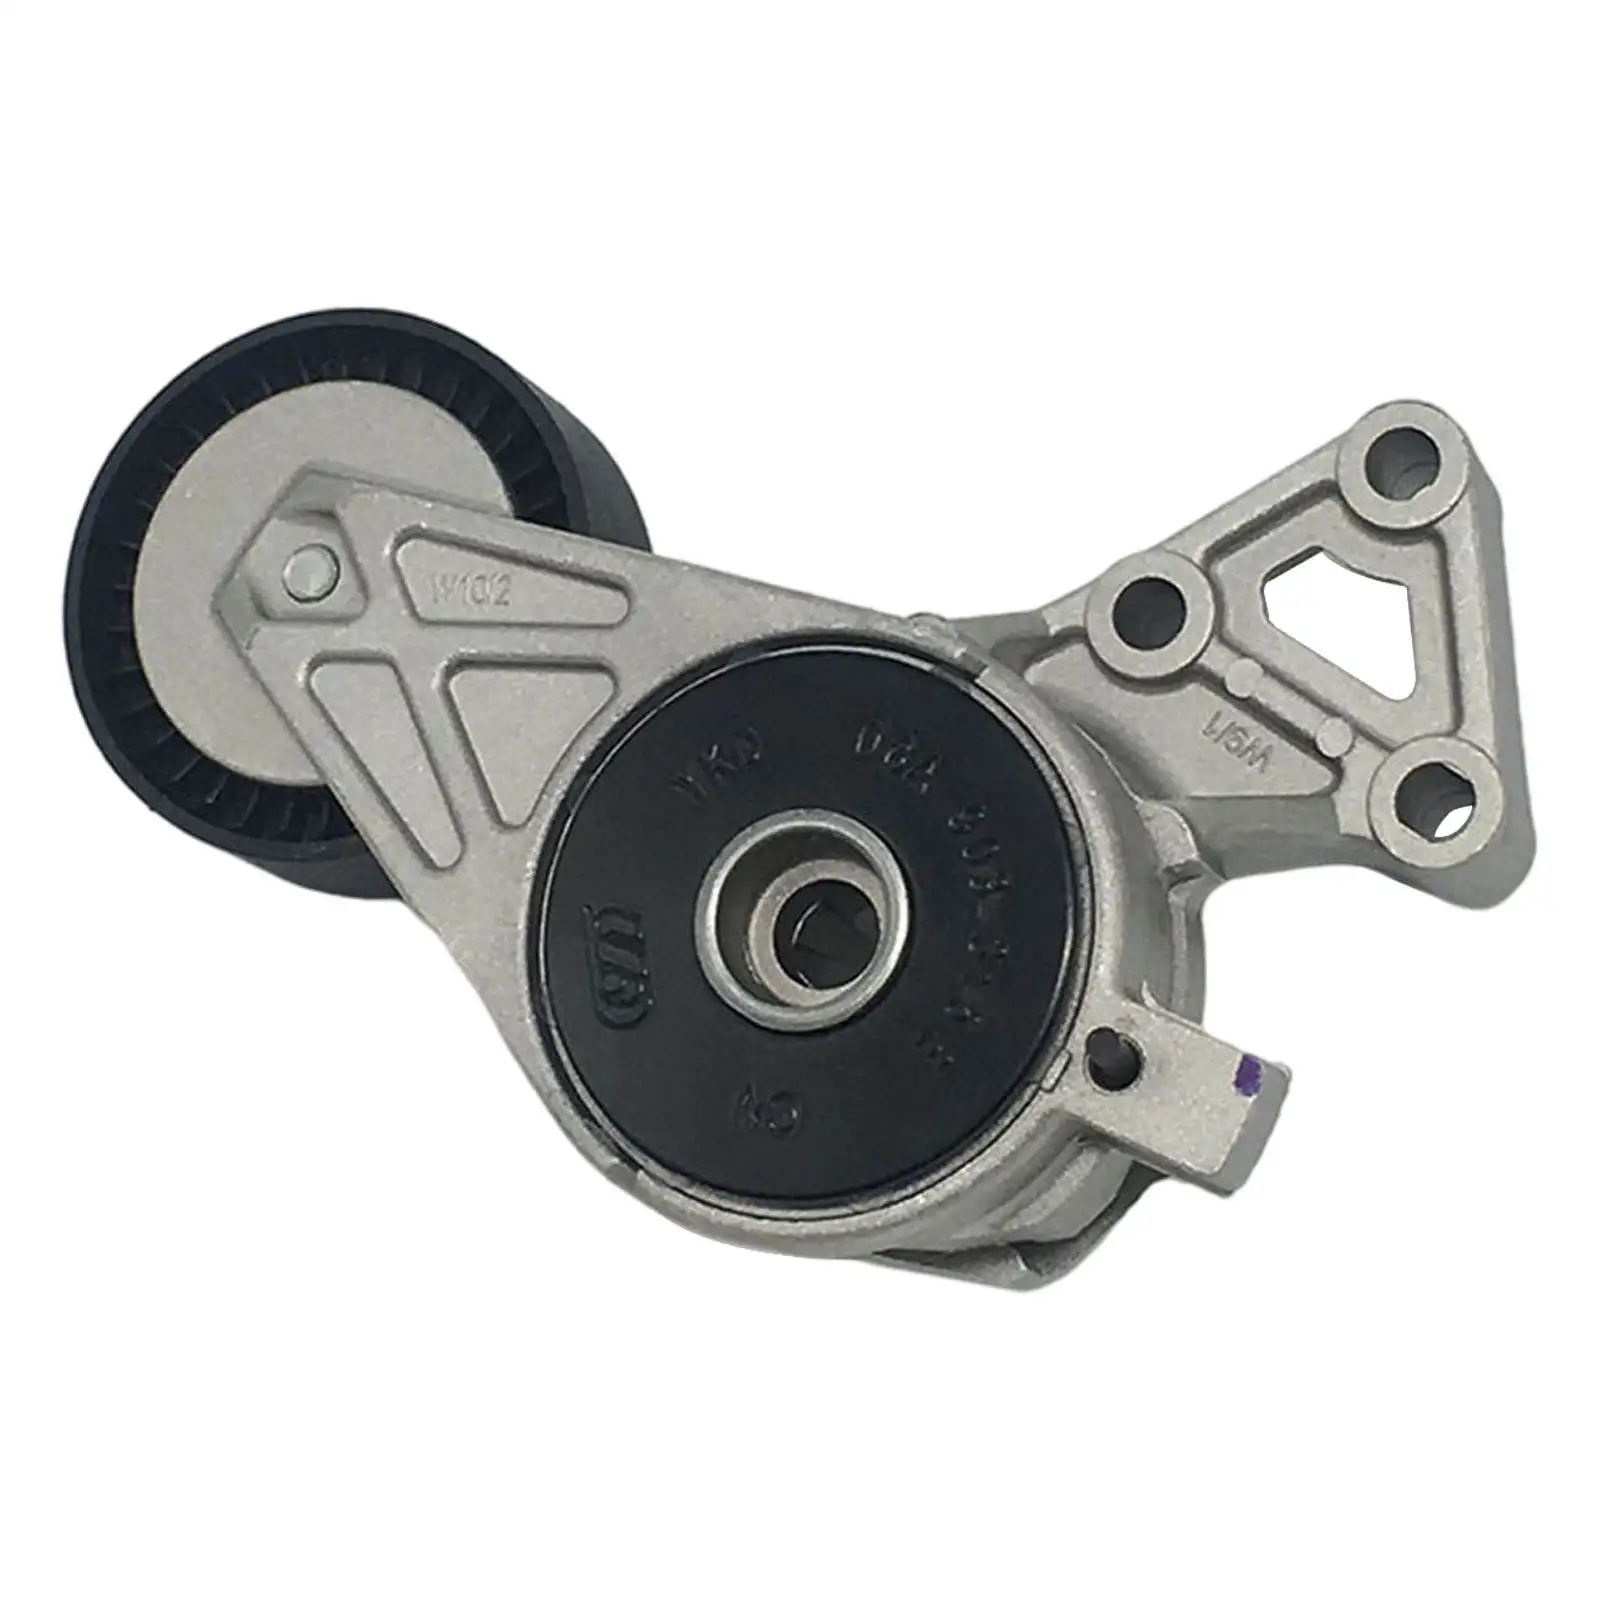 A/C Automatic Belt Tensioner with Pulley for VW Golf Car Parts Replace